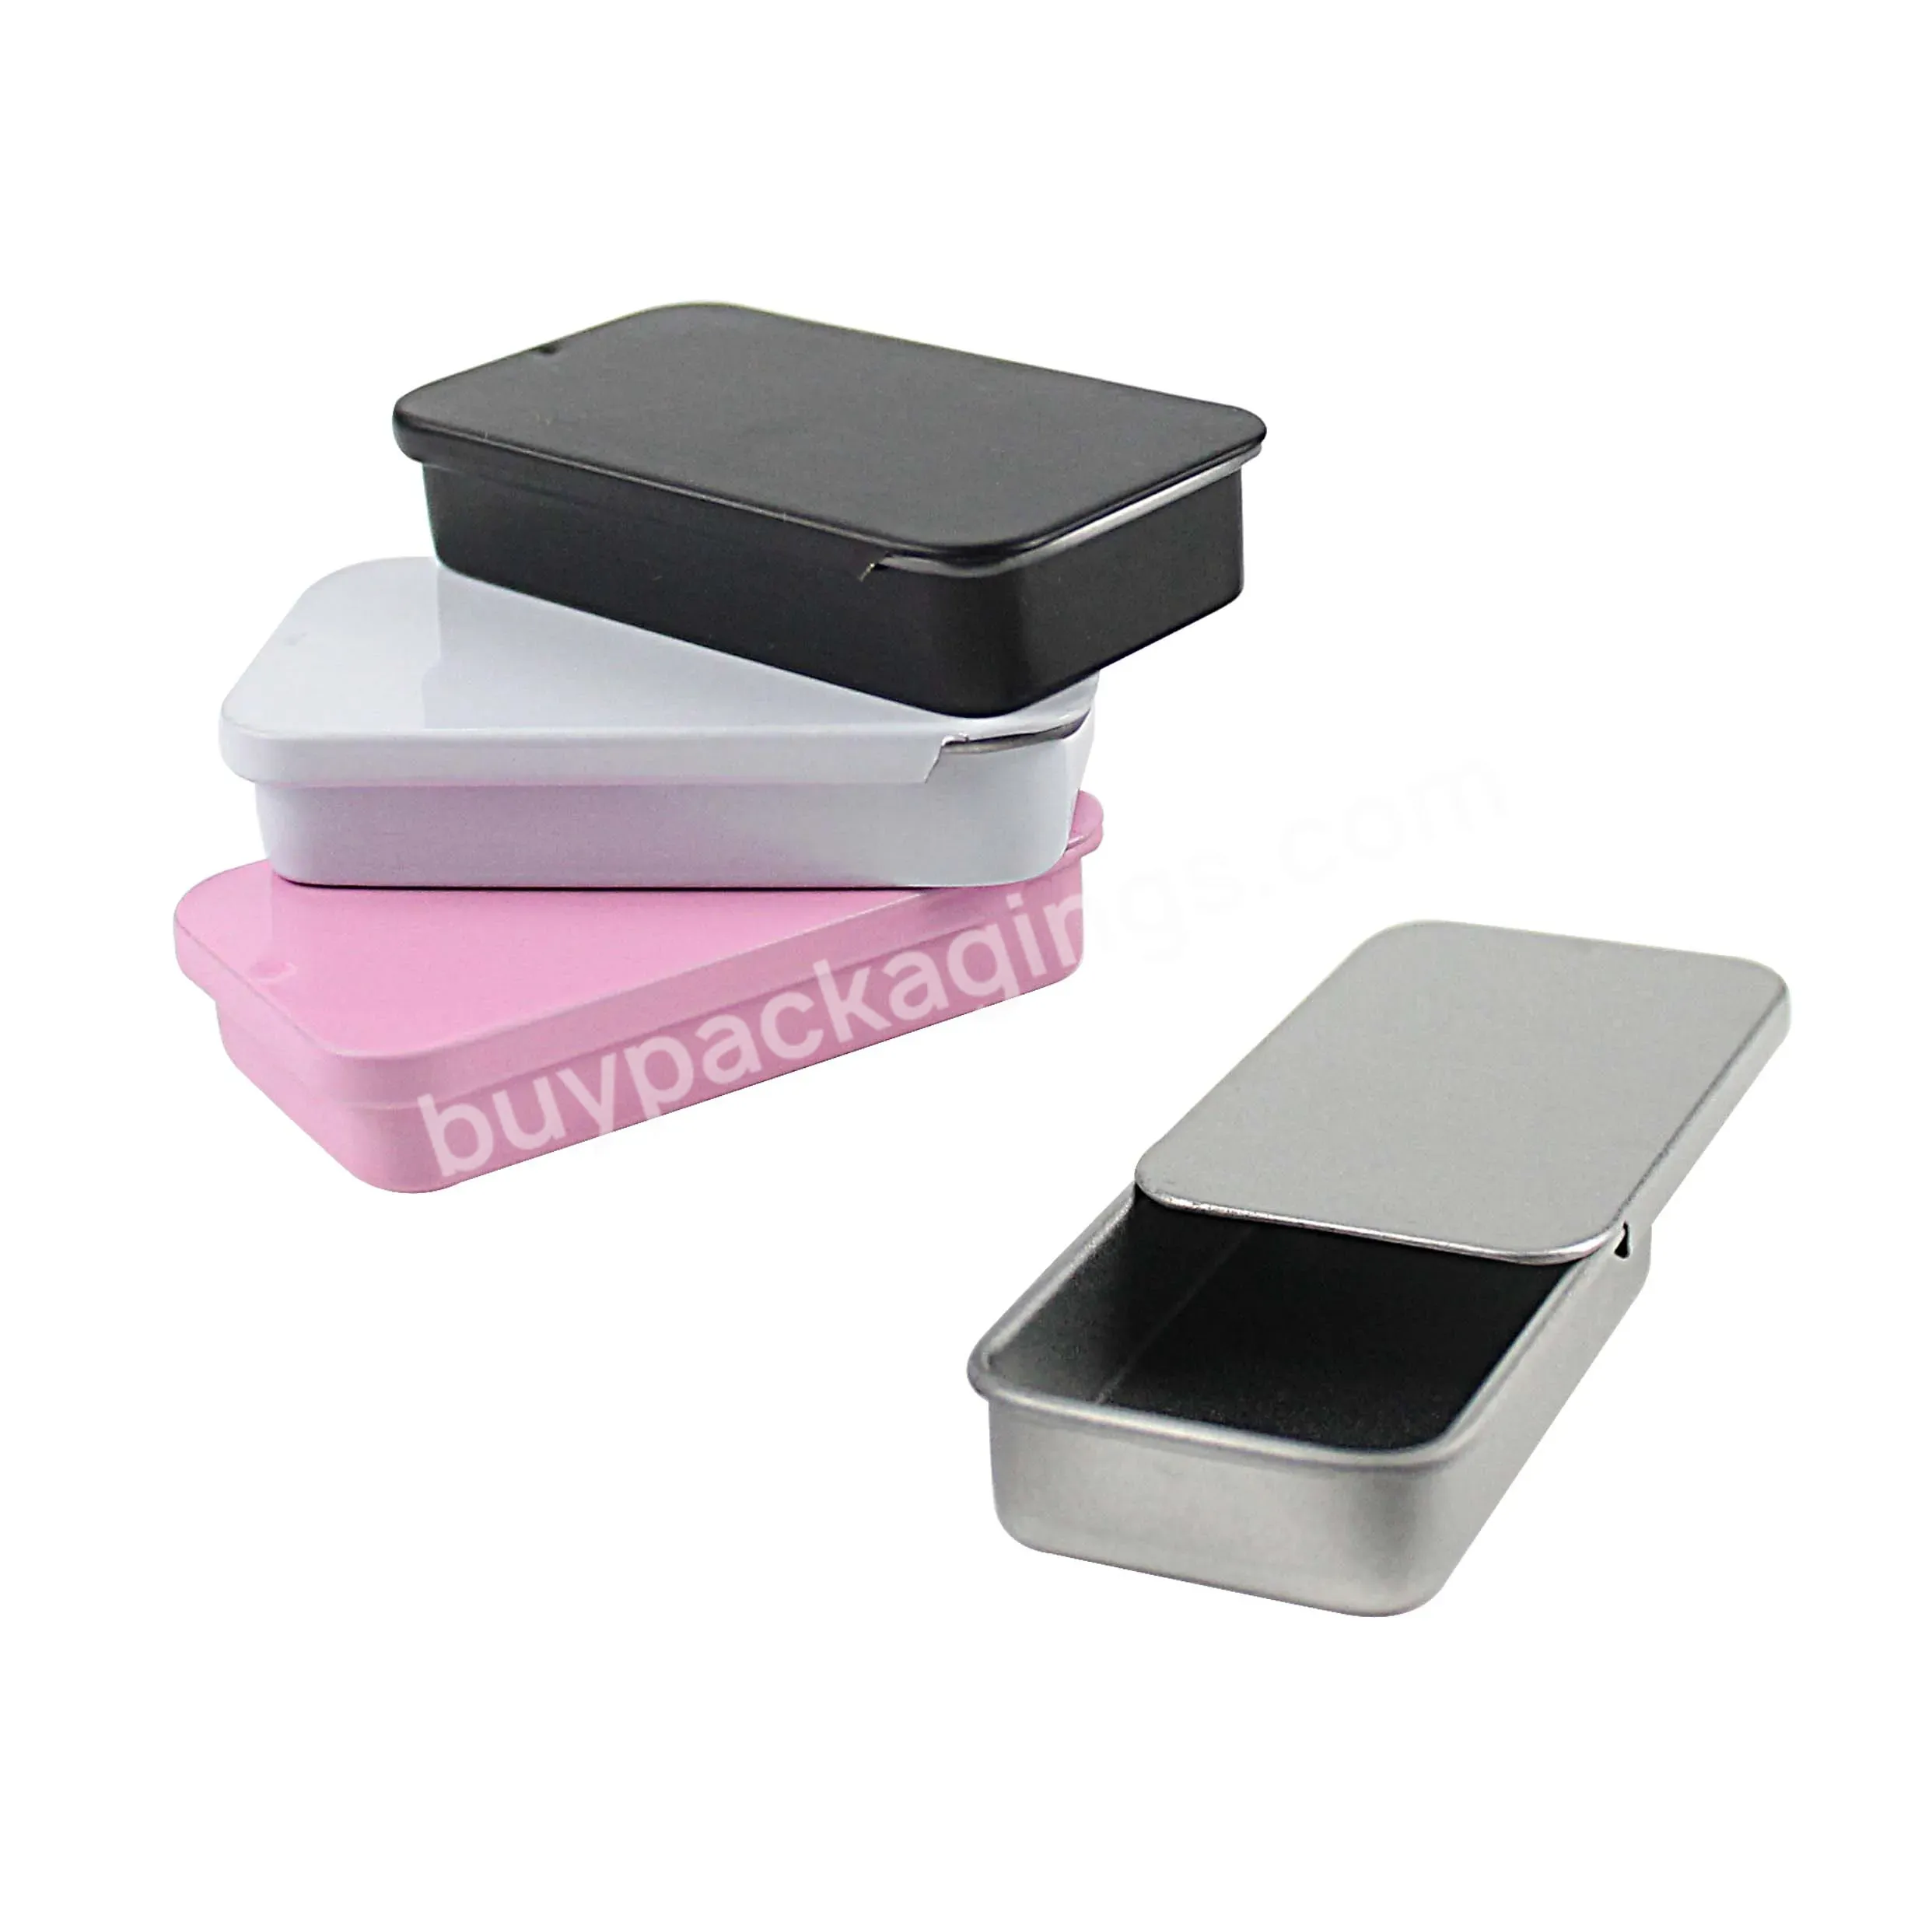 Empty Small Rectangle Candy/mint/cosmetic/brow Soap/solid Perfume/lip Balm Slide Top Metal Tin Case/box/containe - Buy Small Rectangular Slide Top,Empty Small Rectangle Pink White Black Mint/cosmetic/brow Soap/solid Perfume/lip Balm Slide Top Metal T